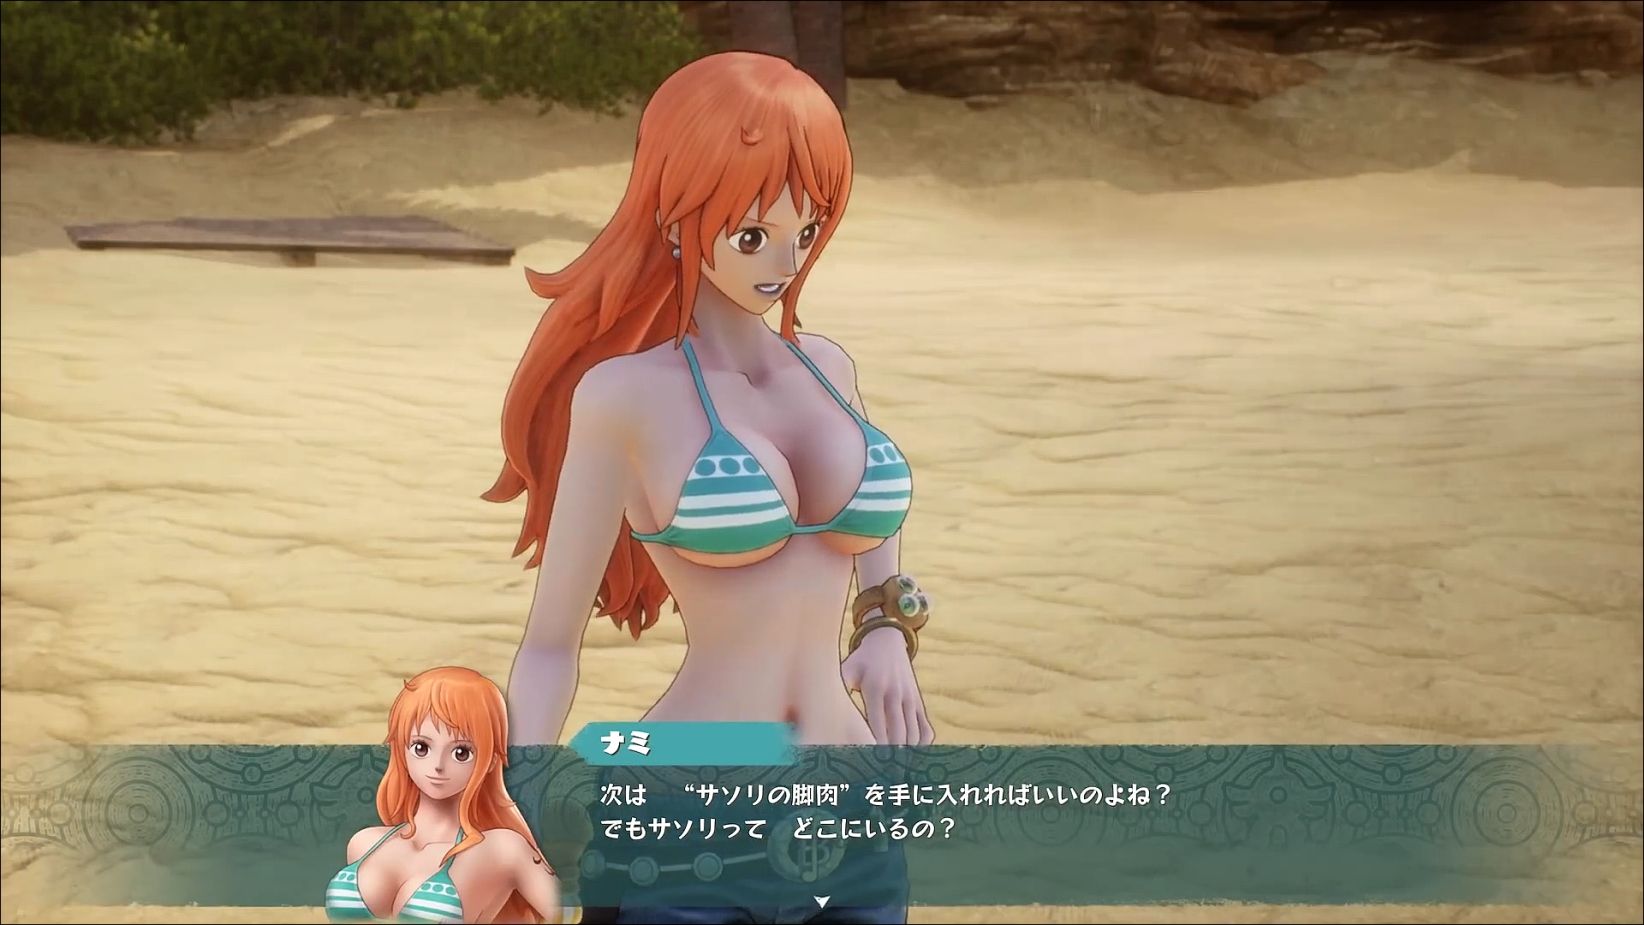 【Image】New "One Piece Odyssey", Nami and Robin 3D model is too erotic 3